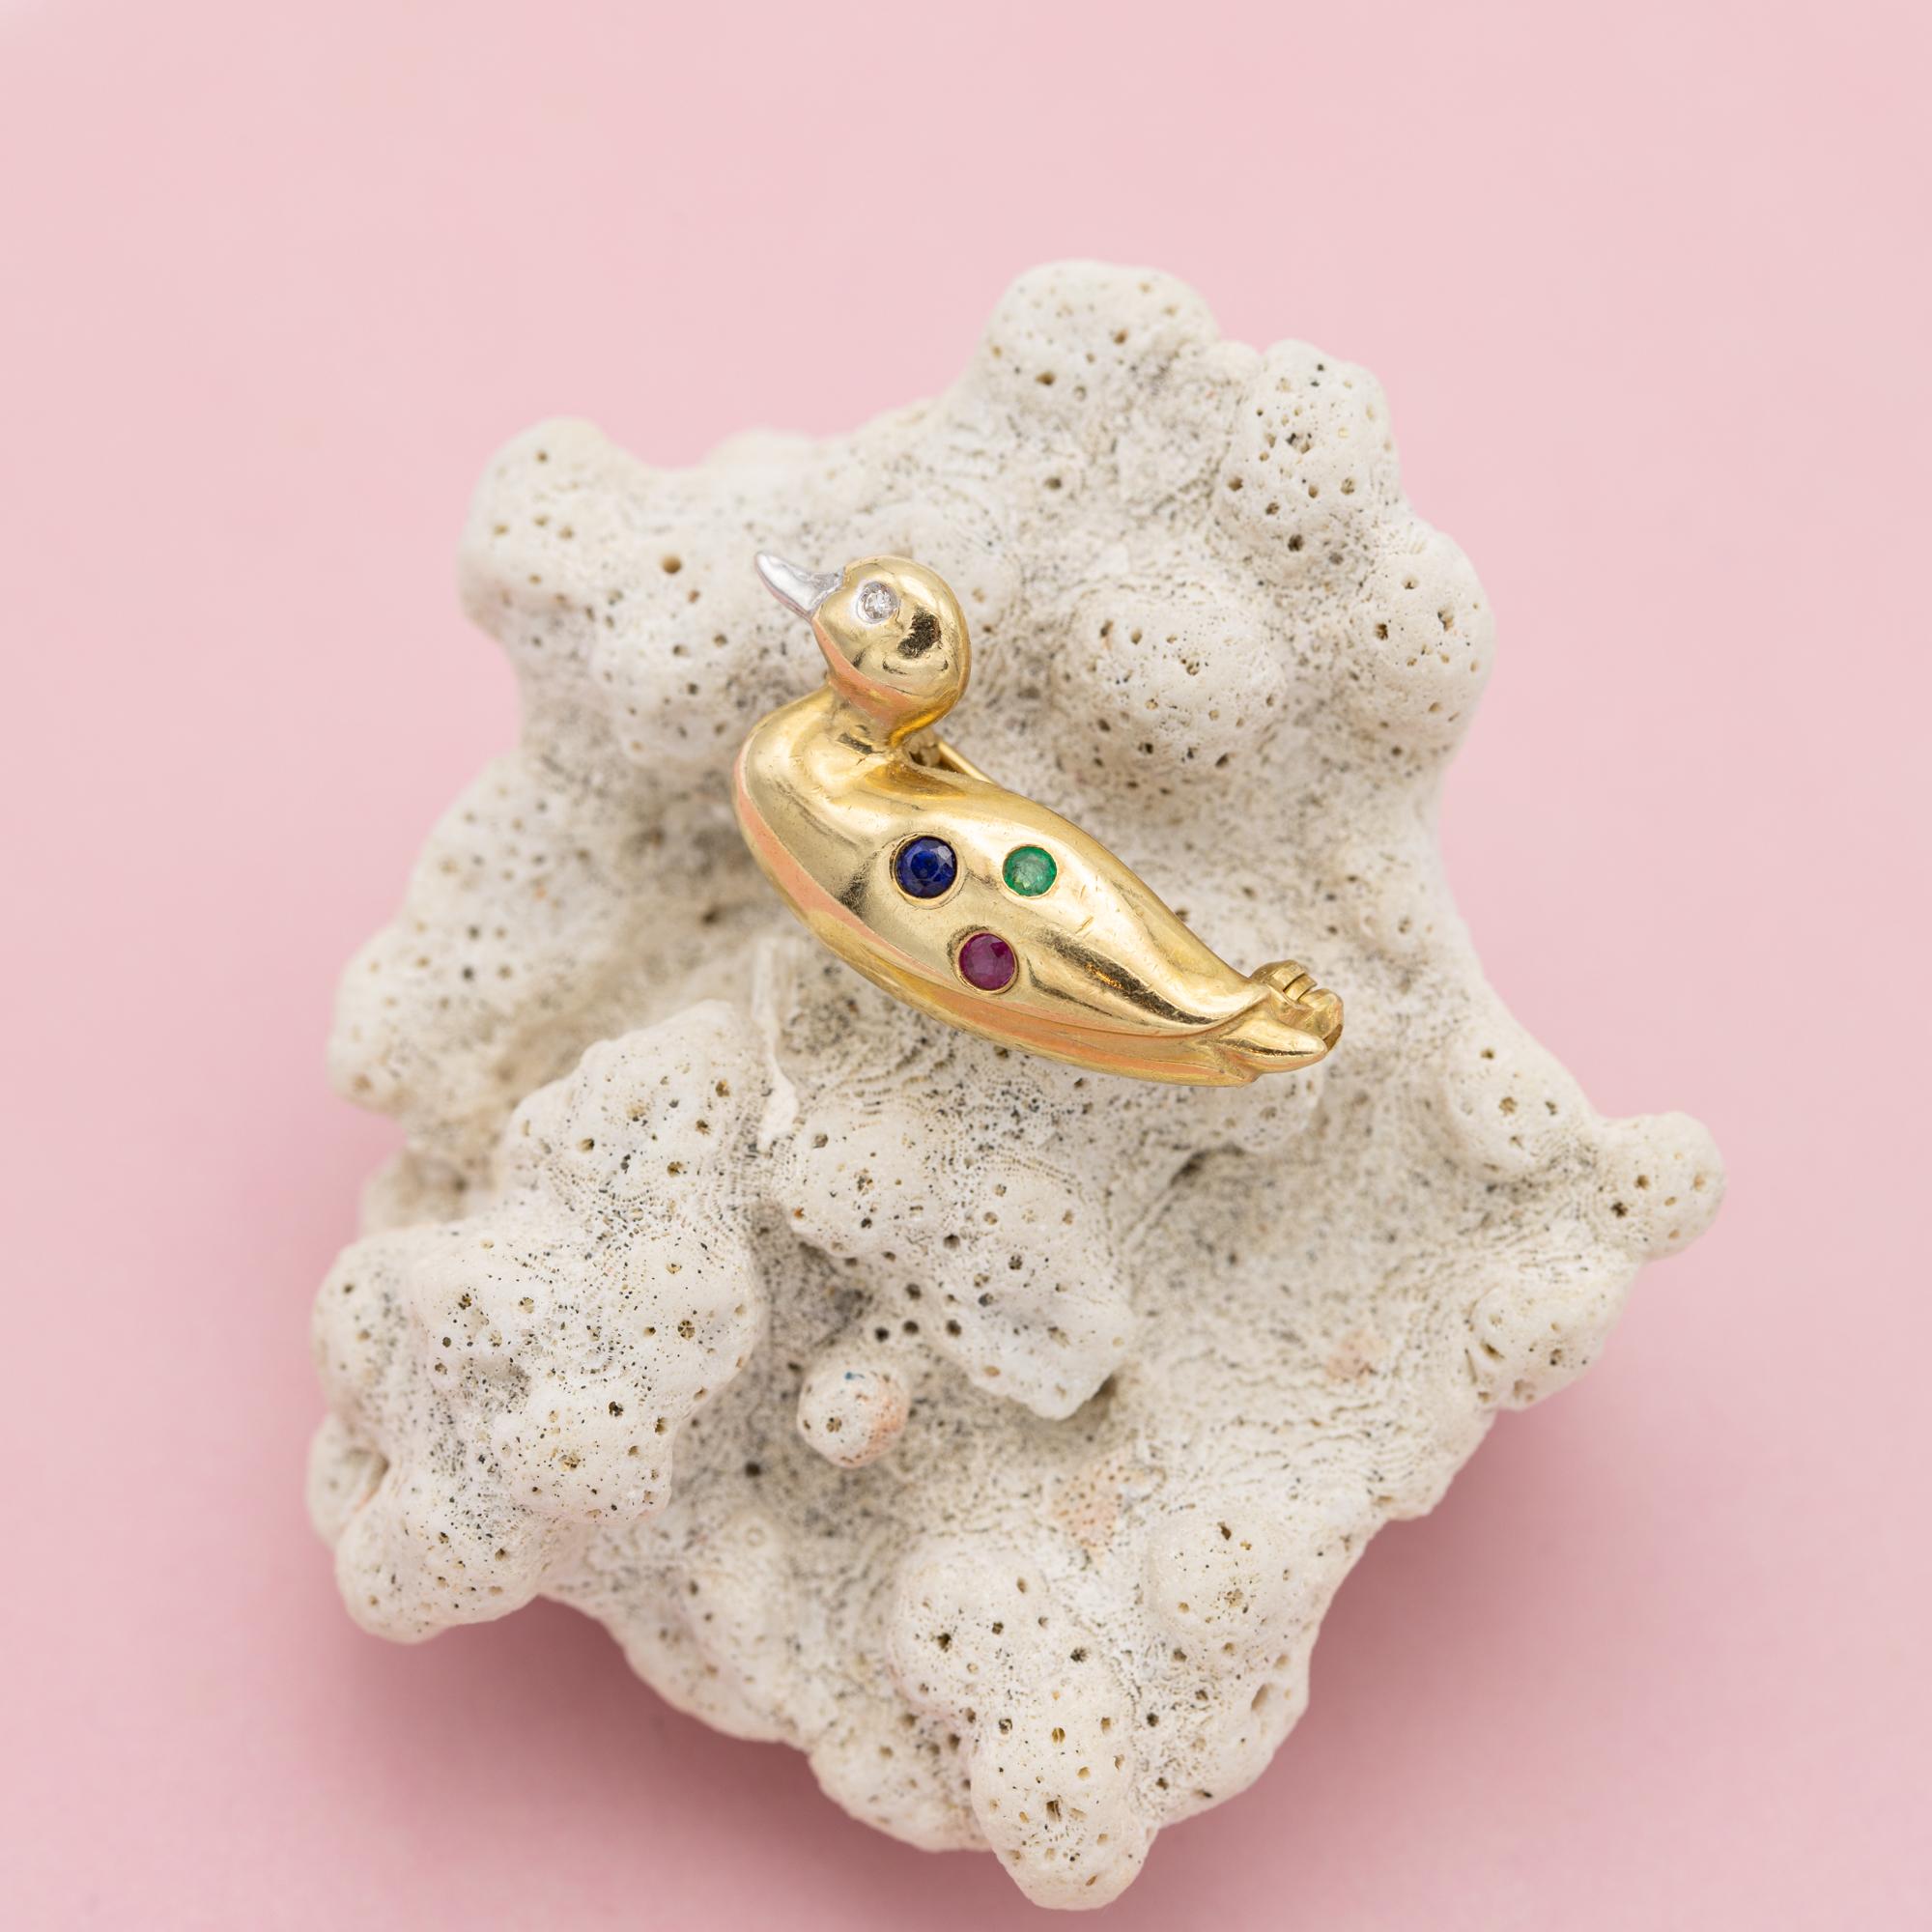 For sale is this very cute Belgian duck brooch. This 18k yellow gold animal is set with a single cut diamond eye and decorated with a sapphire, ruby and sapphire. It bears a Belgian 750 mark. The brooch is functioning and in very good condition